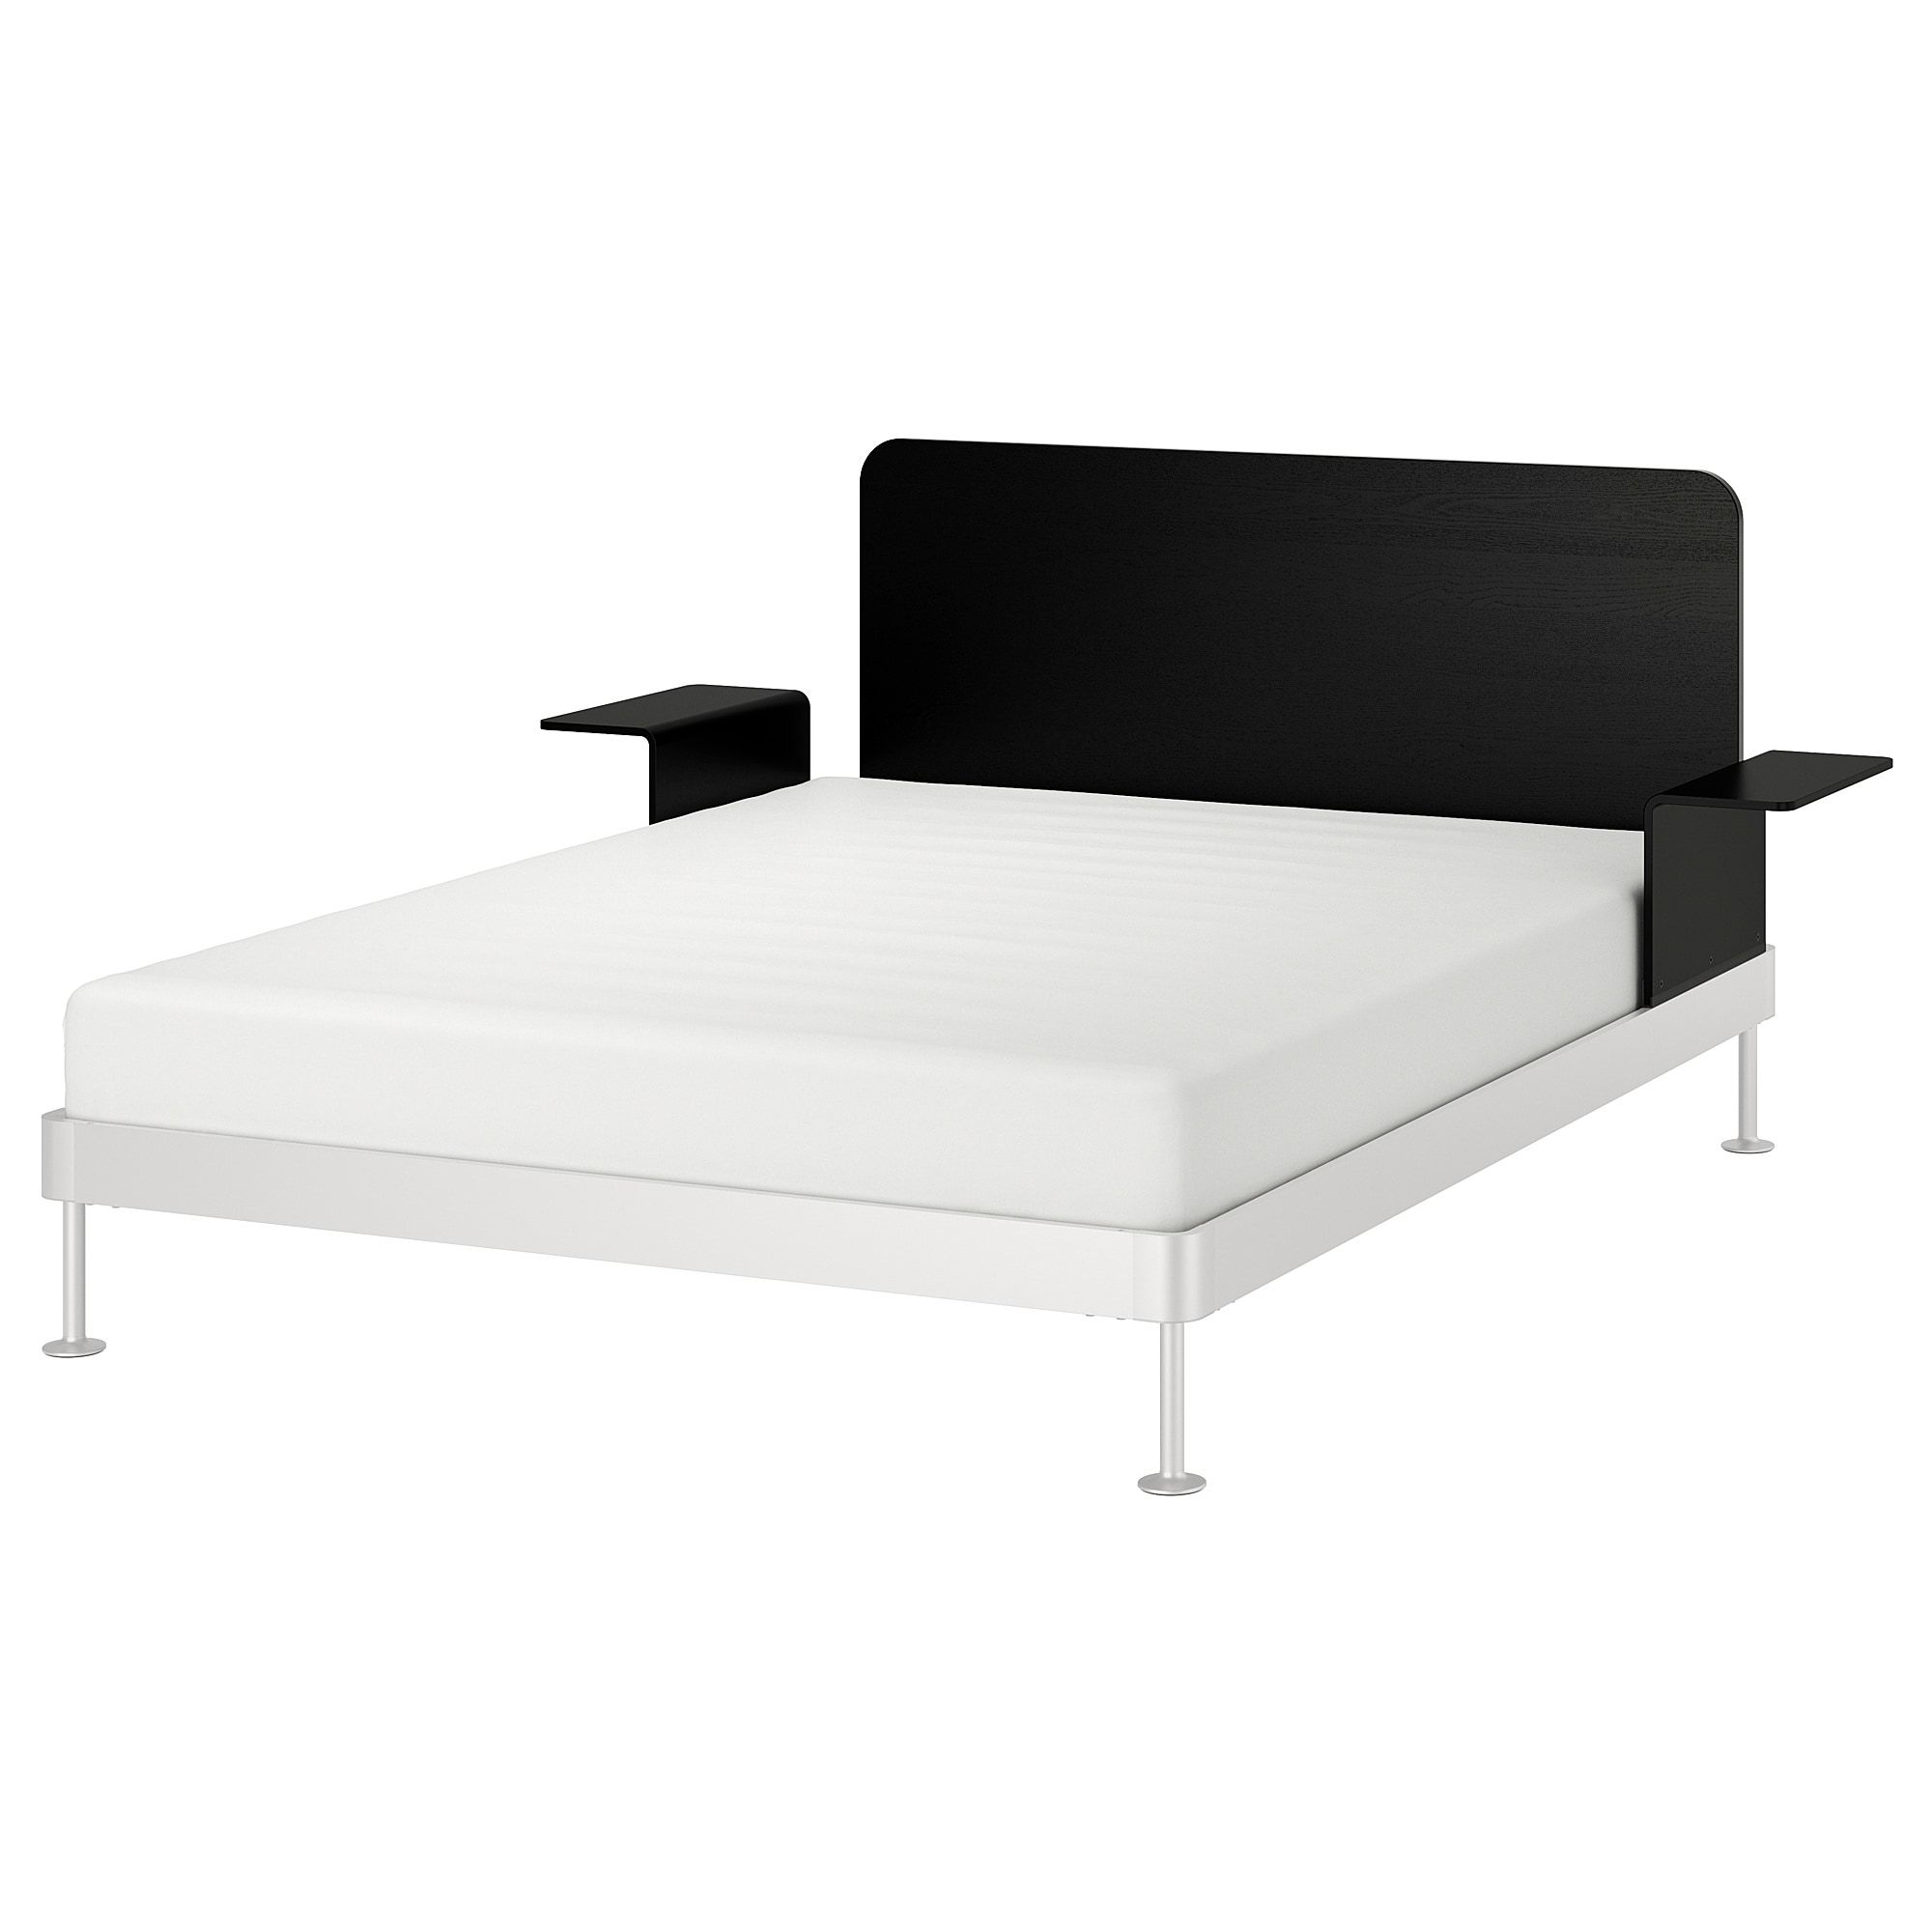 DELAKTIG Bed and Accessories